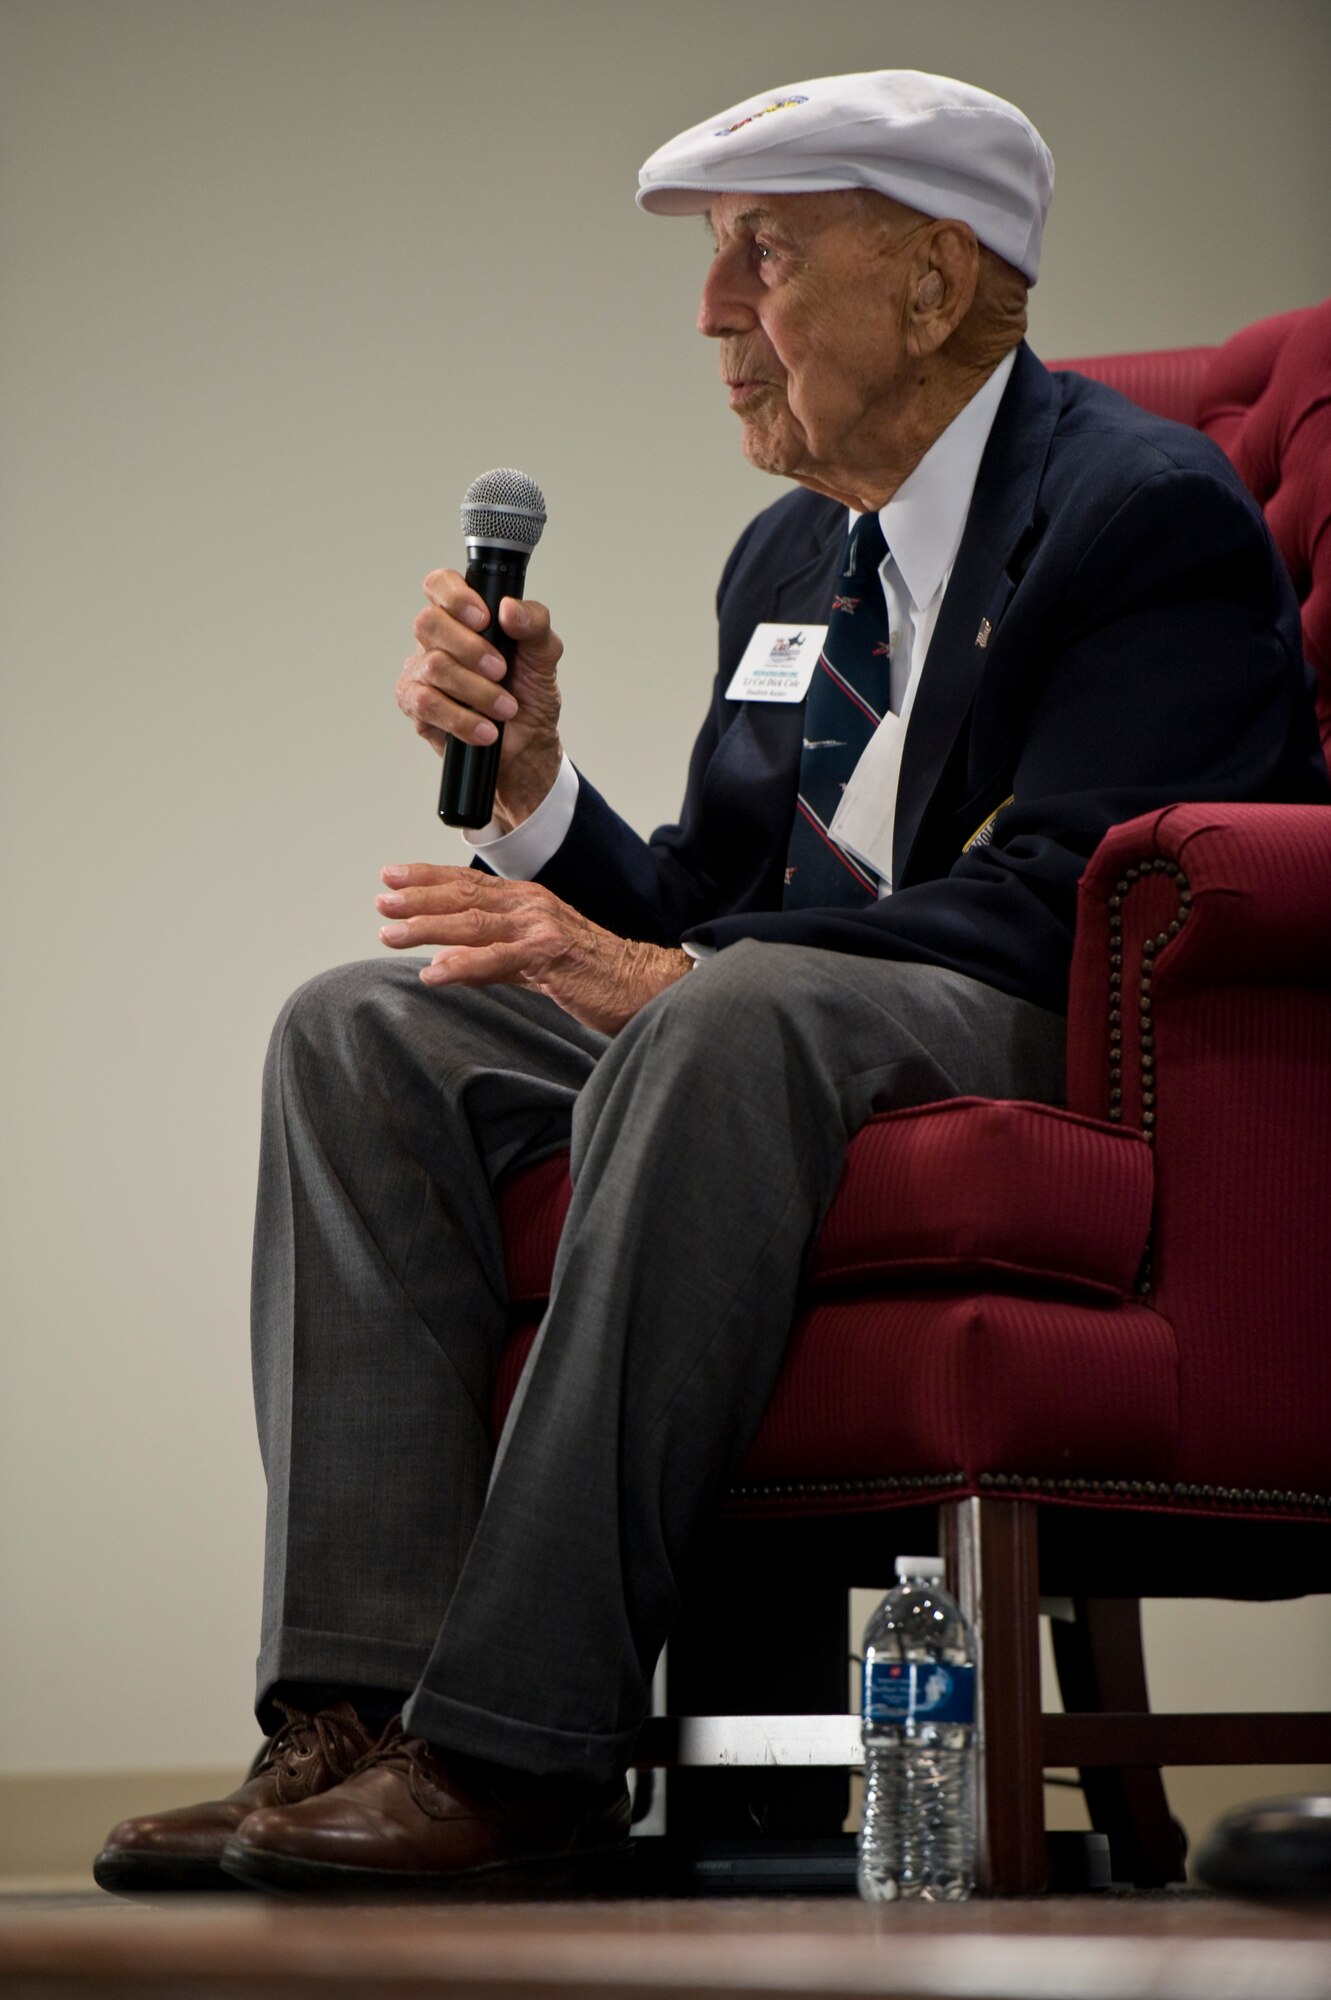 Retired U.S. Air Force Lt. Col. Richard Cole, one of the Doolittle Raiders, answers questions from Hurlburt Airmen during a session at the 319th Special Operations Squadron auditorium at Hurlburt Field, Fla., April 18, 2013. Cole served as co-pilot alongside then-Lt. Col. James Doolittle during a bombing raid over Japan April 18, 1942. (U.S. Air Force photo/Airman 1st Class Hayden K. Hyatt)